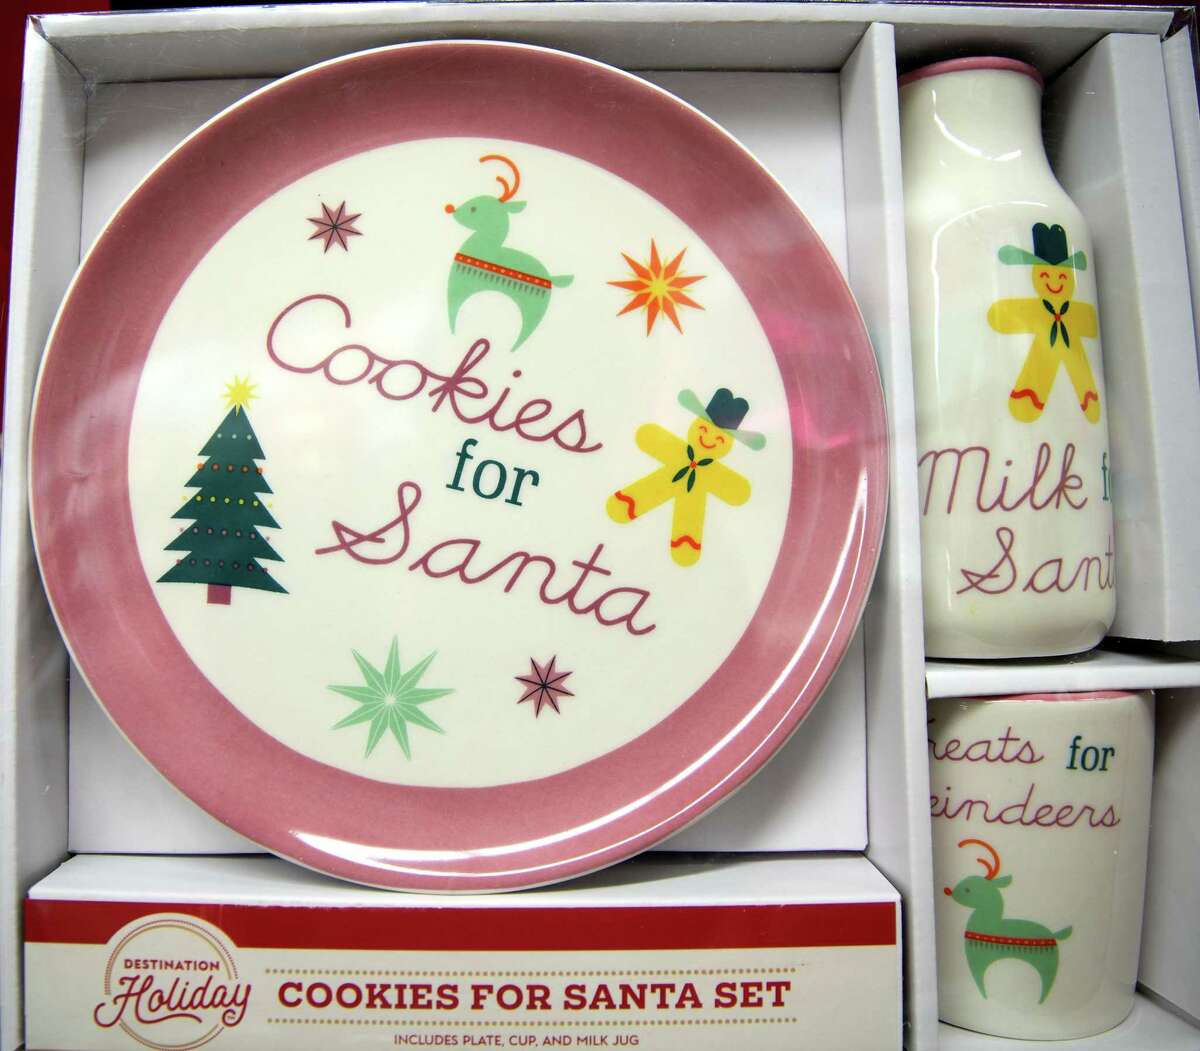 “Cookies for Santa” set available at HEB during the holiday season.